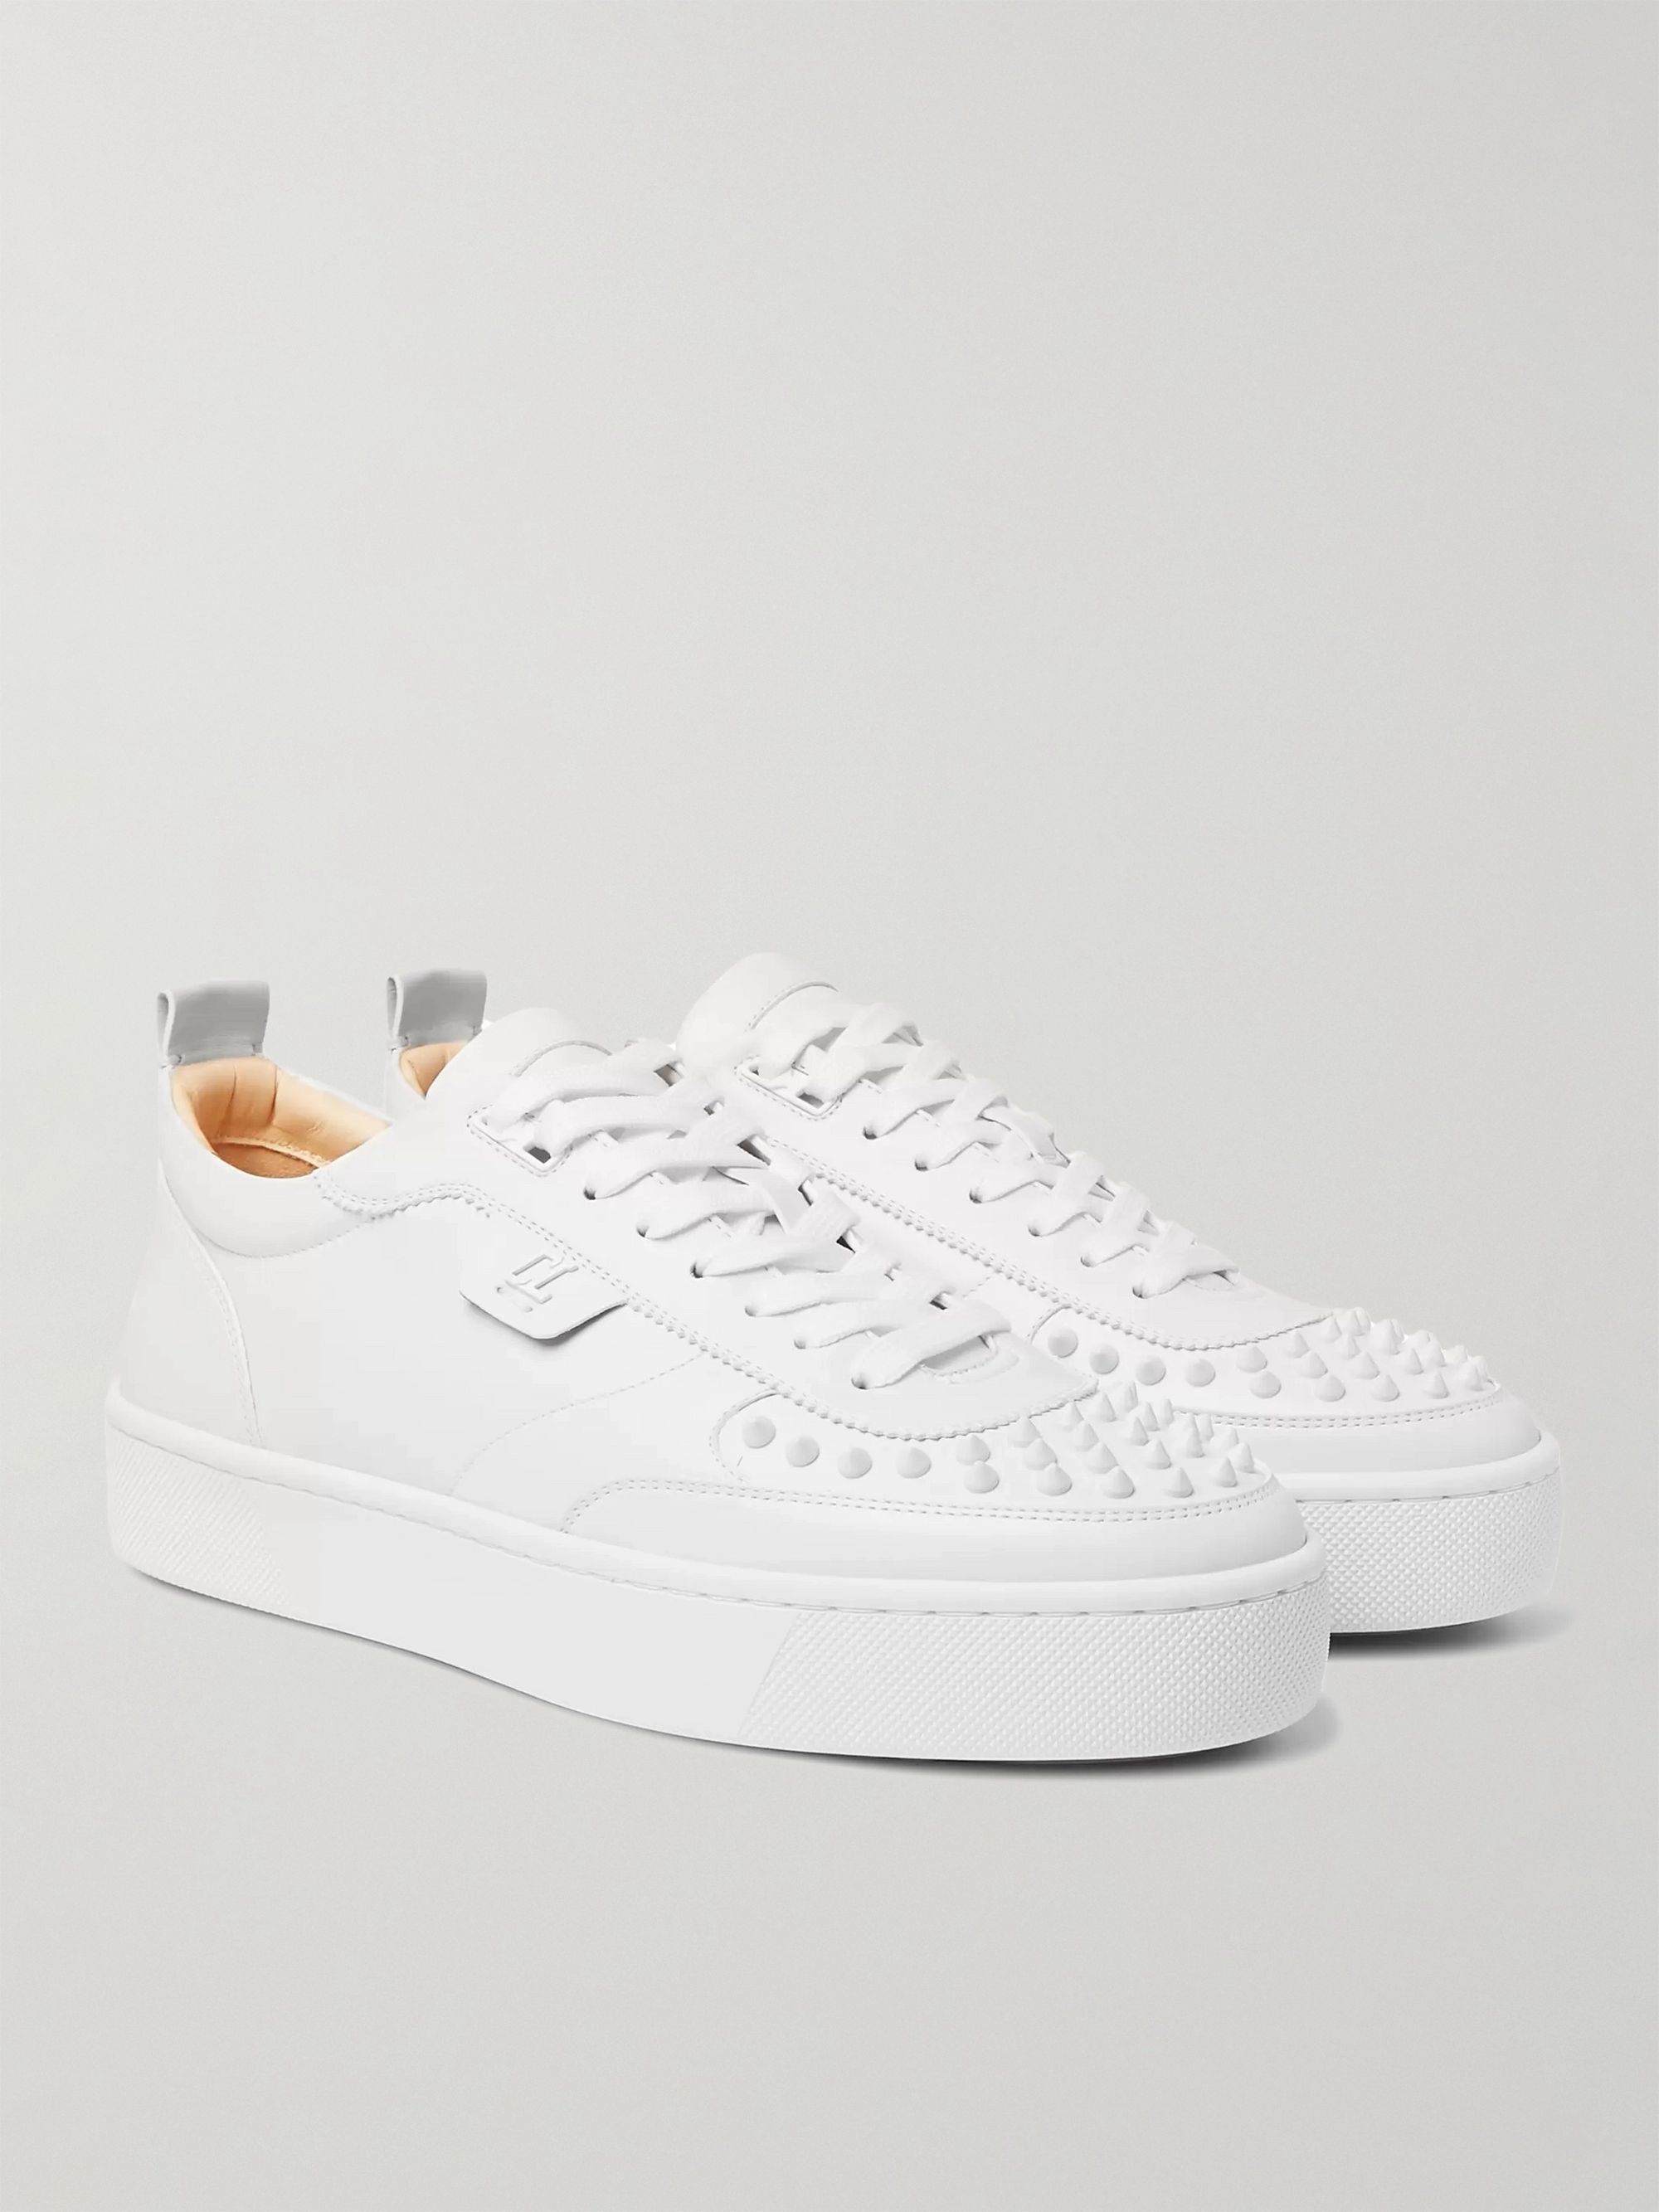 White Happyrui Spiked Leather Sneakers 